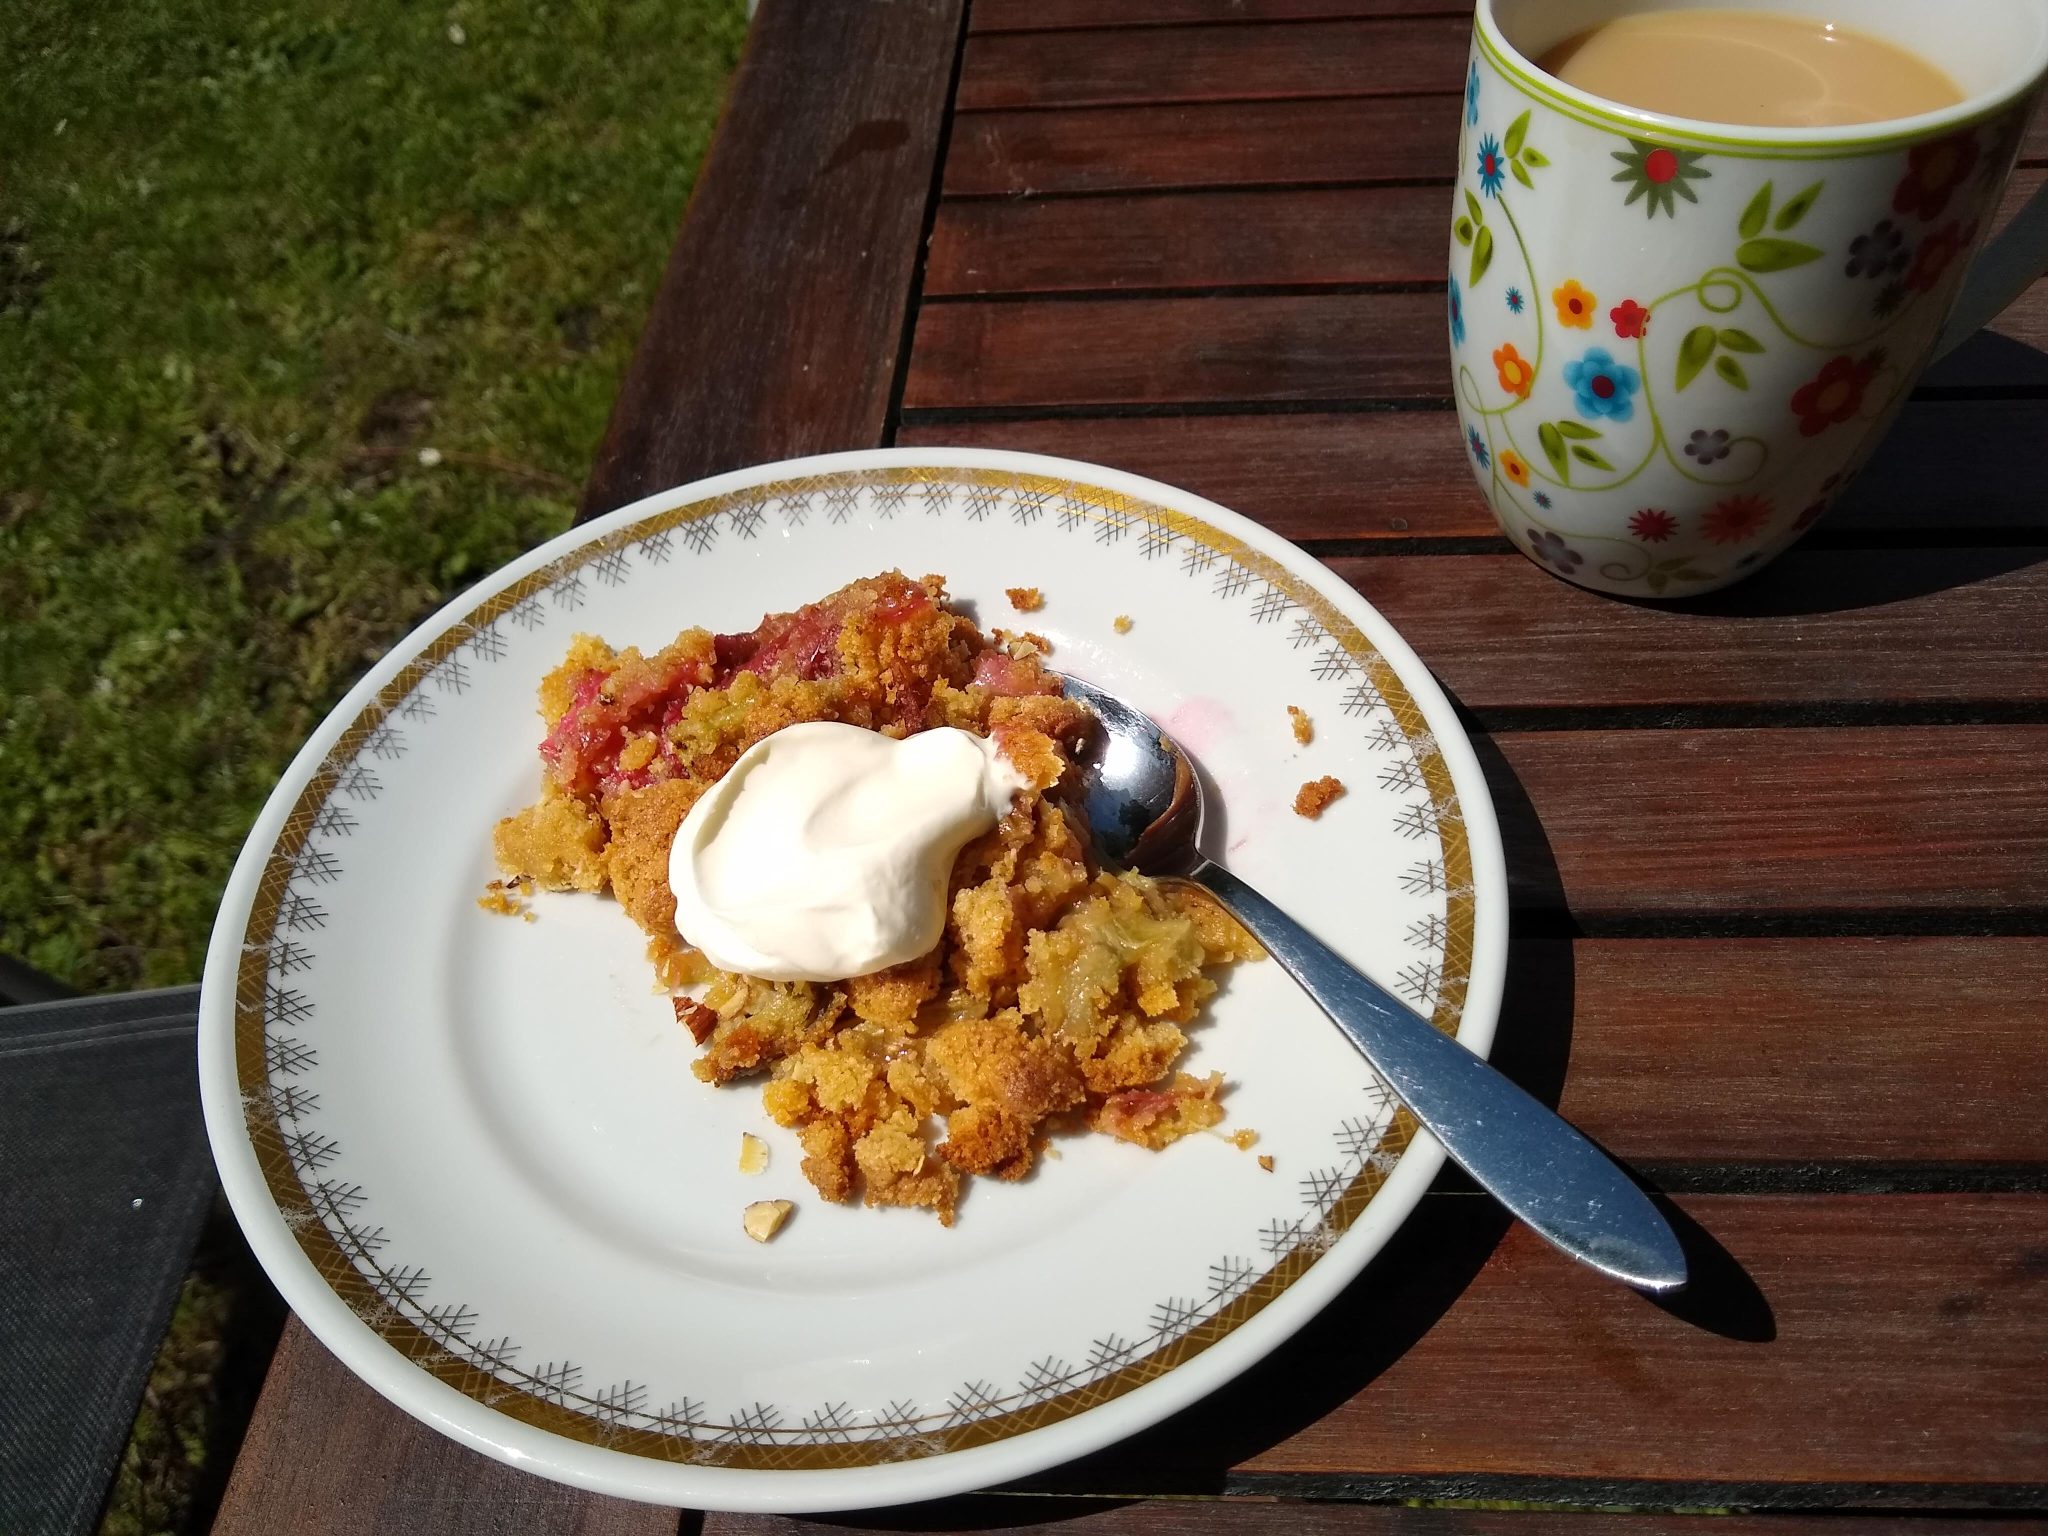 A plate of crumble and a cup of coffee on an outdoor garden table